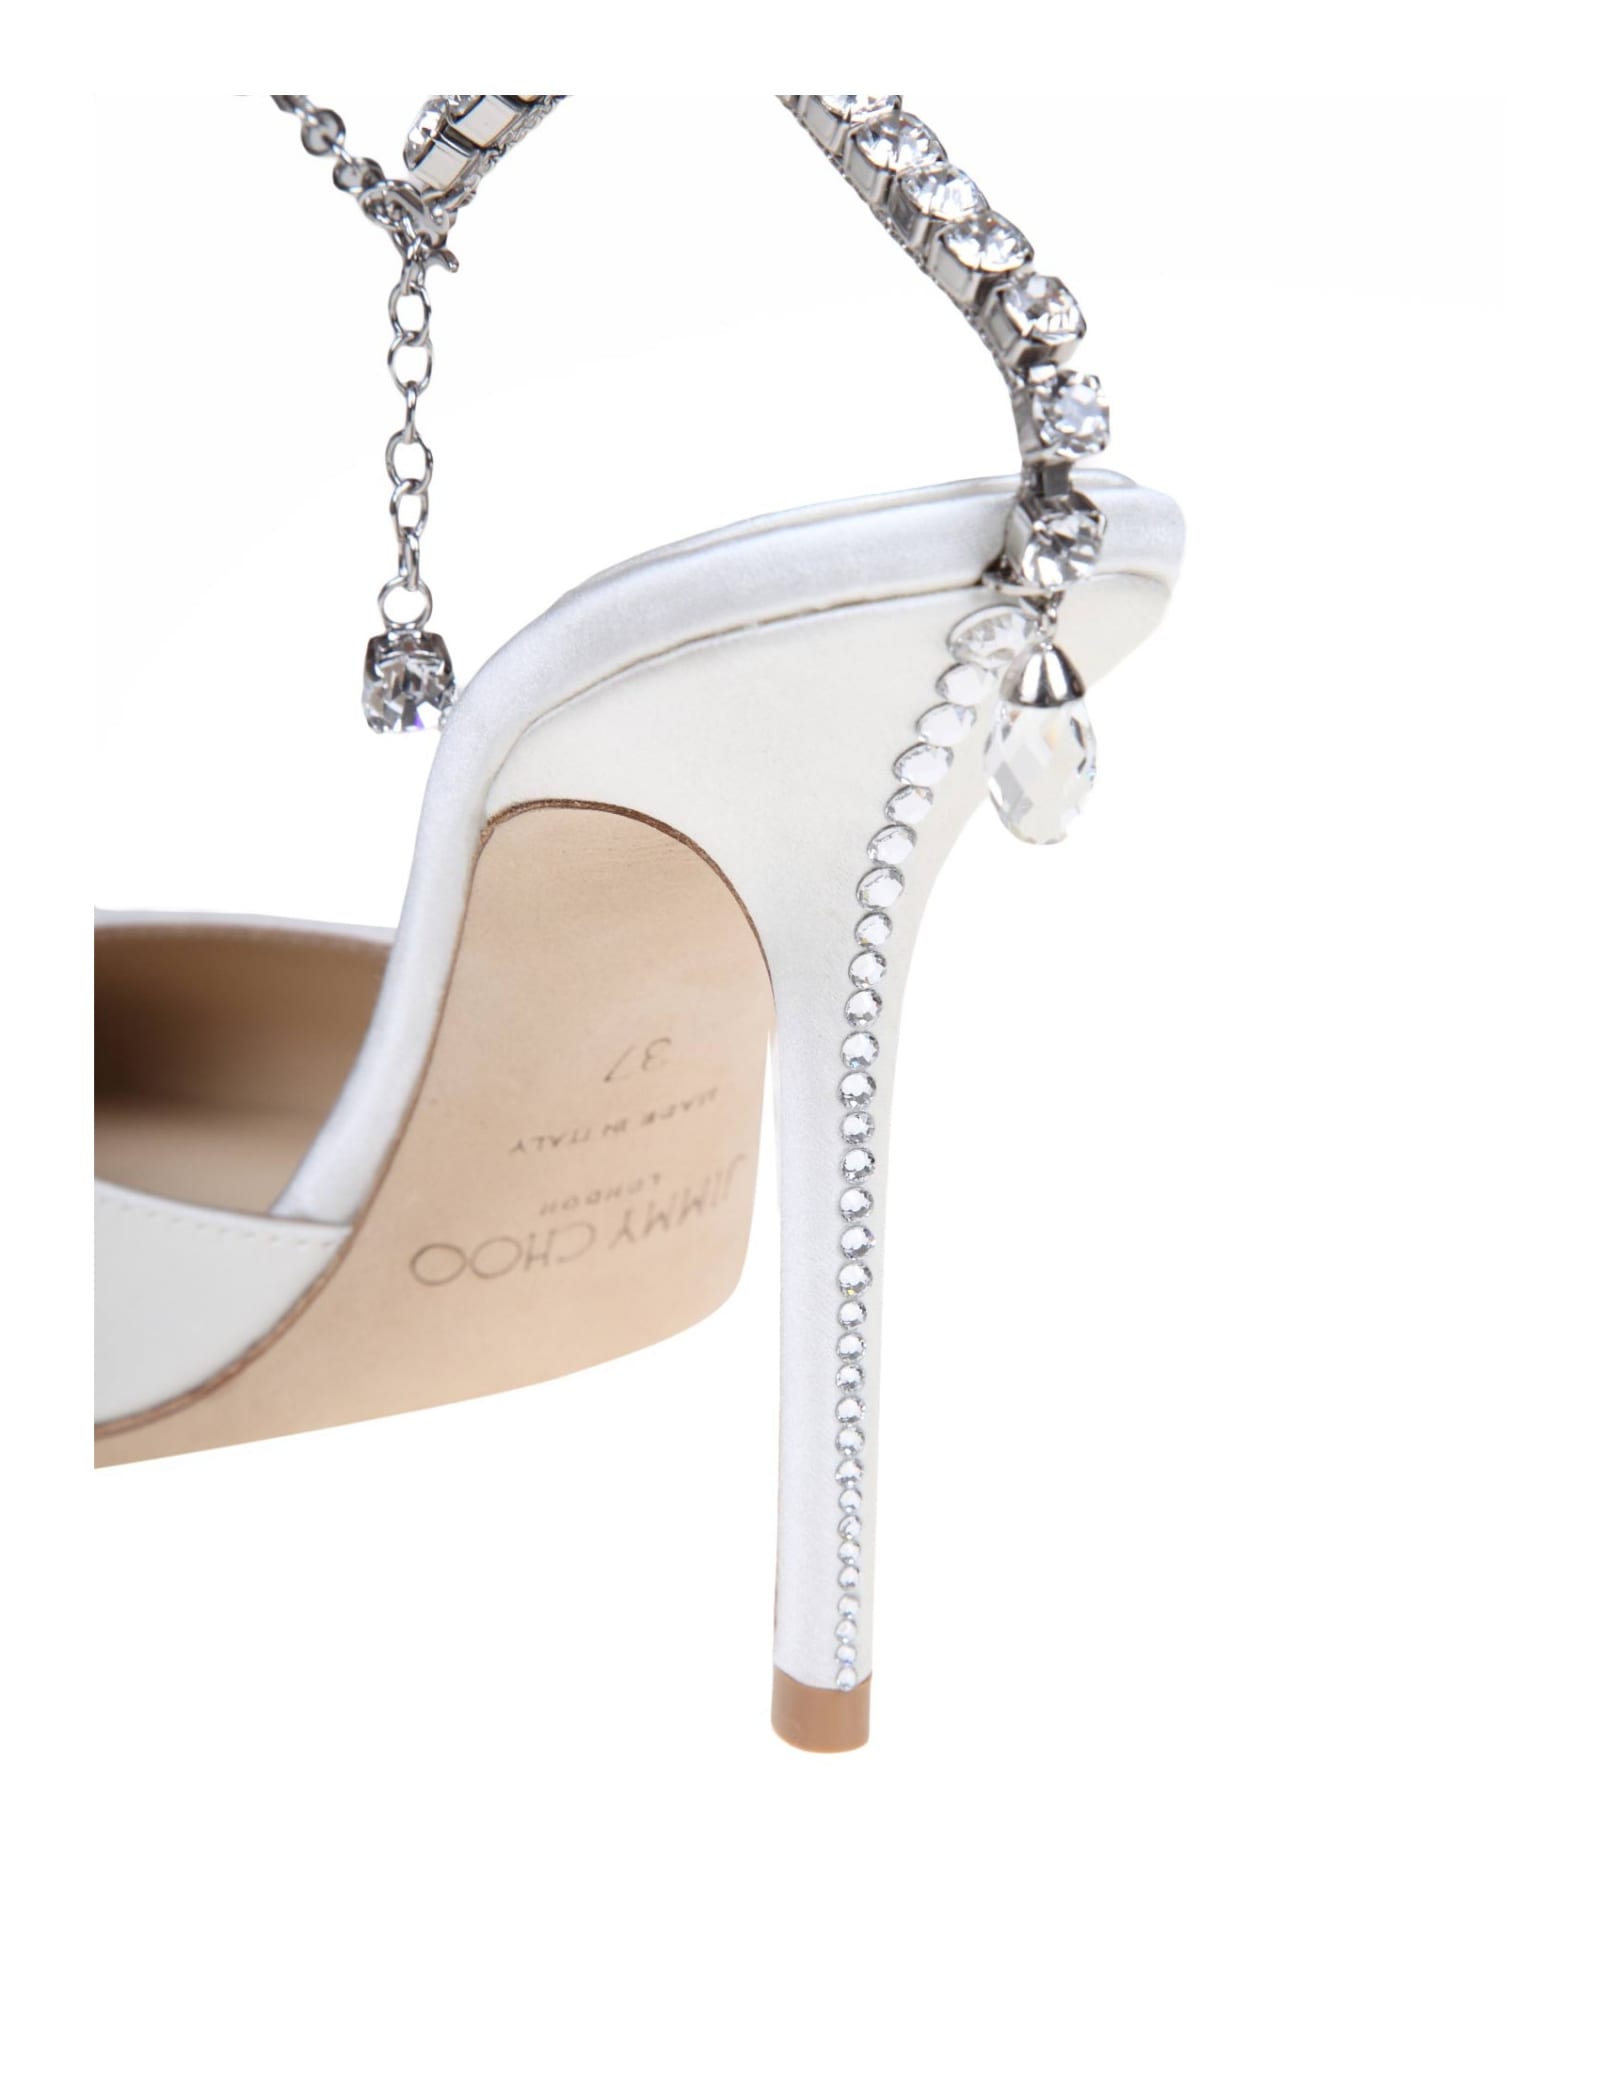 Shop Jimmy Choo Slingback Saeda 100 In Satin With Applied Crystals In Ivory/crystal